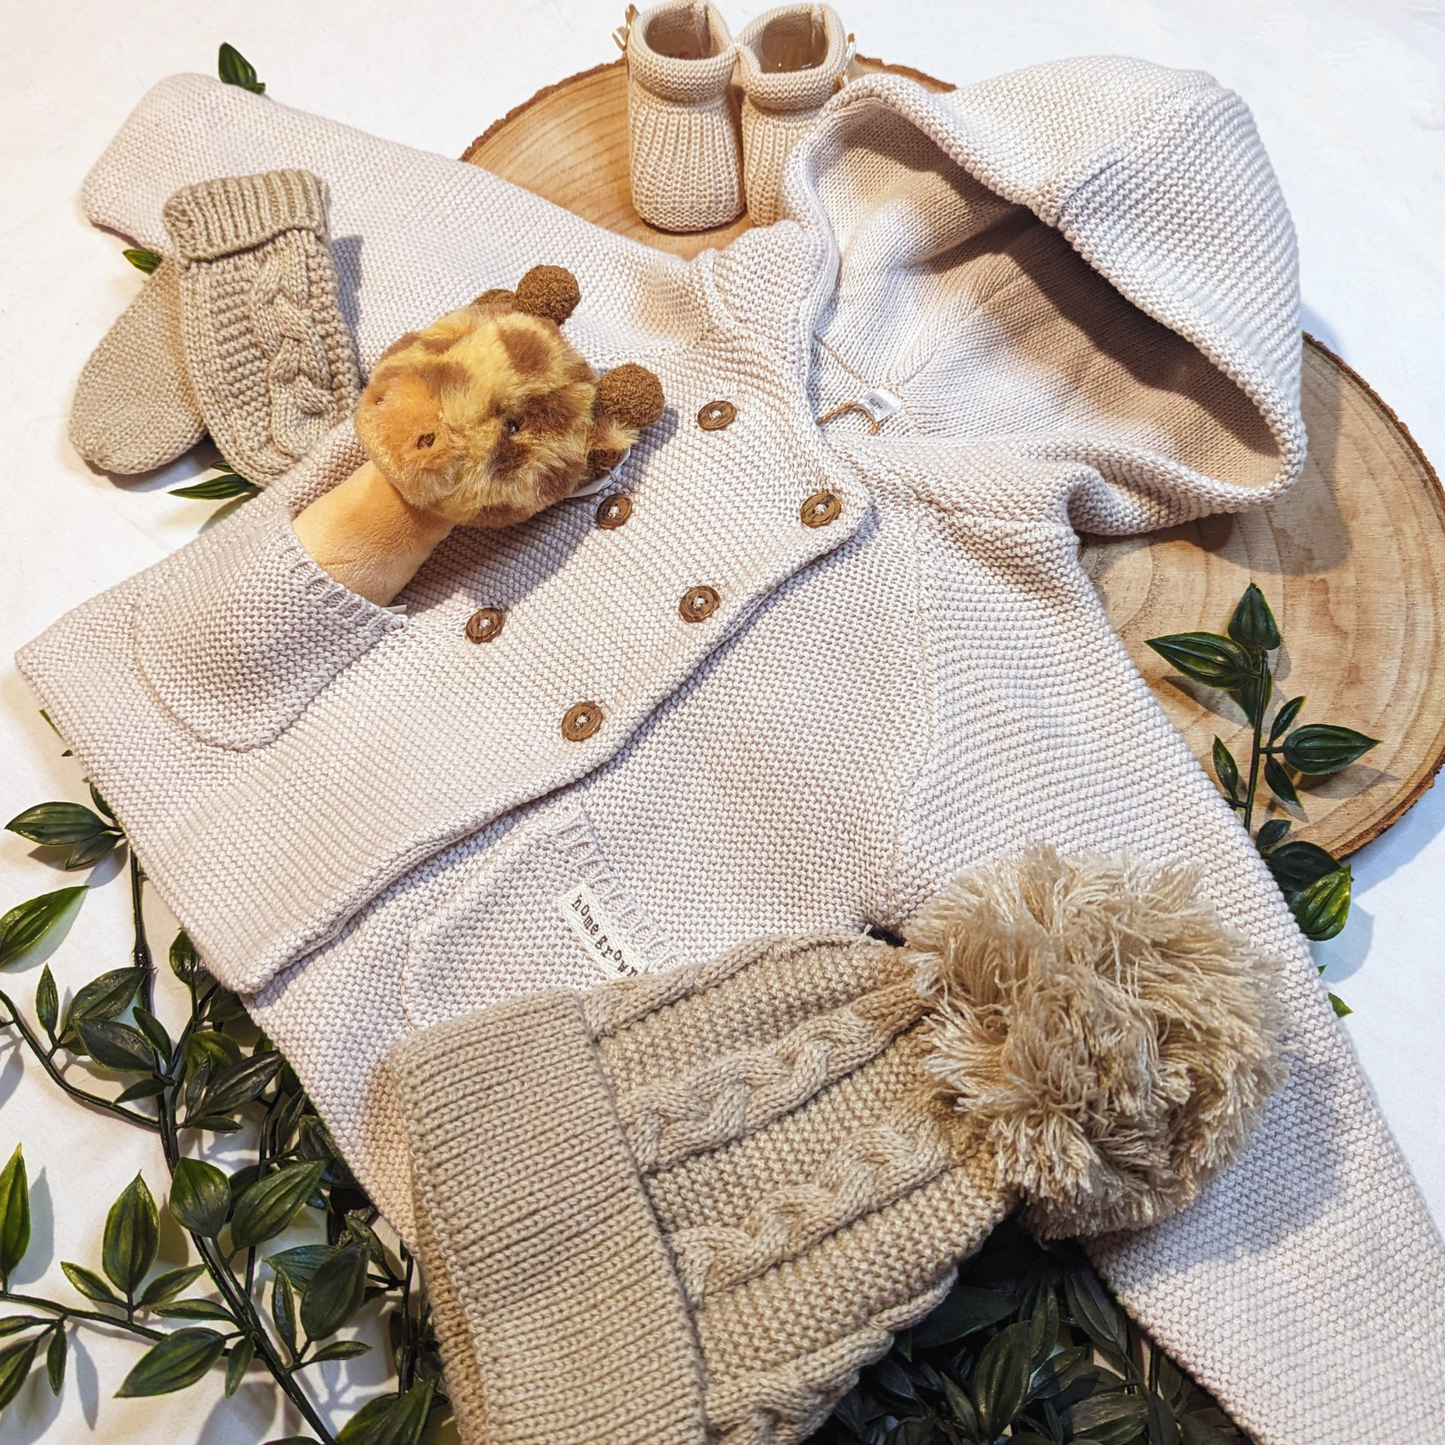 Baby cardigan, knitted in beige organic cotton. Features an adorable hood, double breasted wooden button fastenings and two pockets for practicality. Featuring other baby items available at loobylu baby.